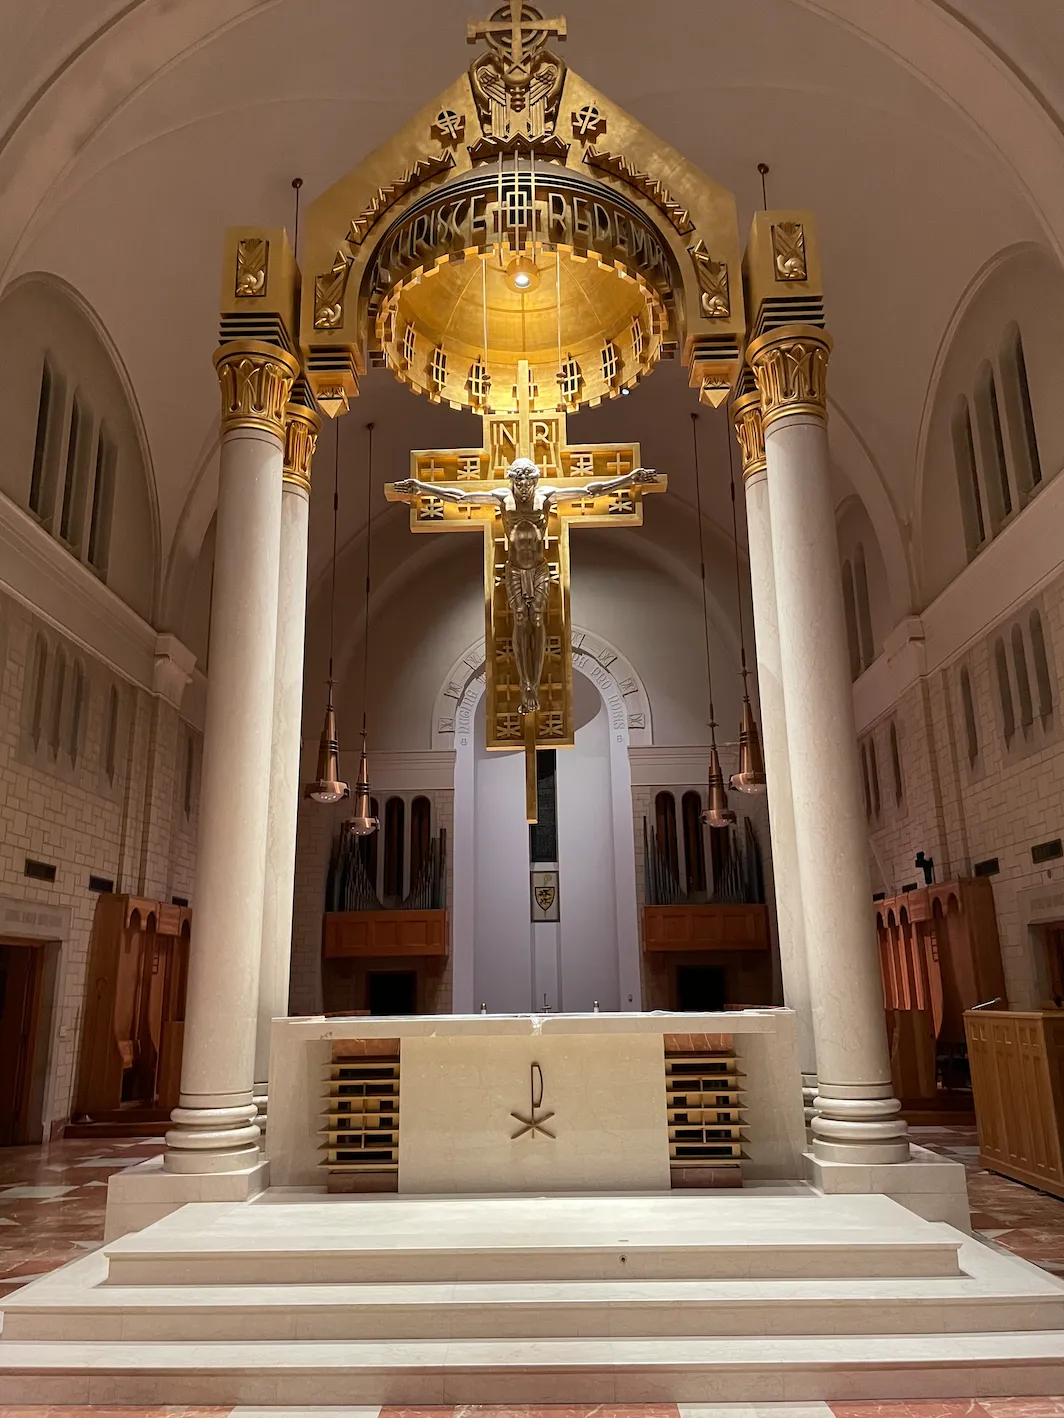 The vandalism of the altar took place under the Crucifix gracing Subiaco Abbey. Subiaco Abbey